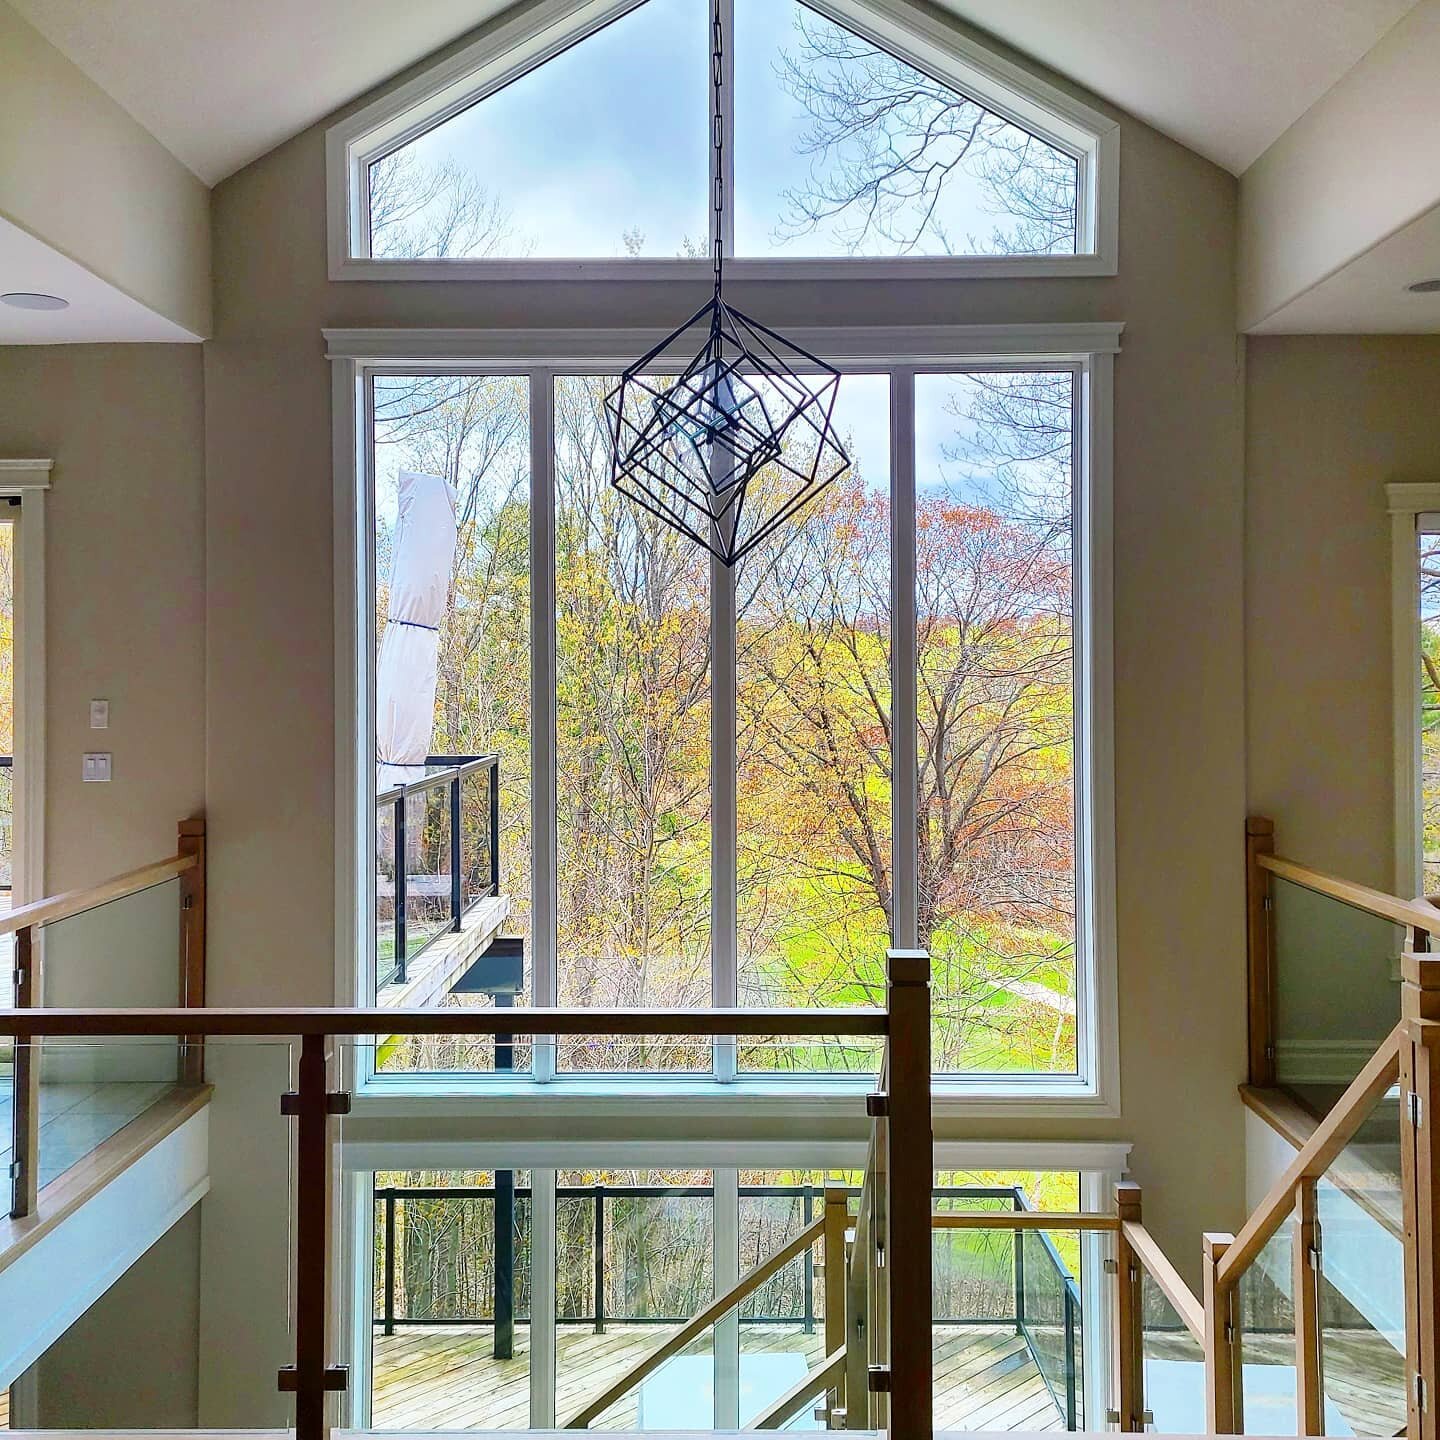 Dramatic floor-to-ceiling feature windows and glass staircase railings made a touch more impactful with perfectly clean glass. 

#upkeep #homeservices #windowcleaning #windowwashing #barrie #orillia #innisfil #simcoecounty #oromedonte #springwater #s